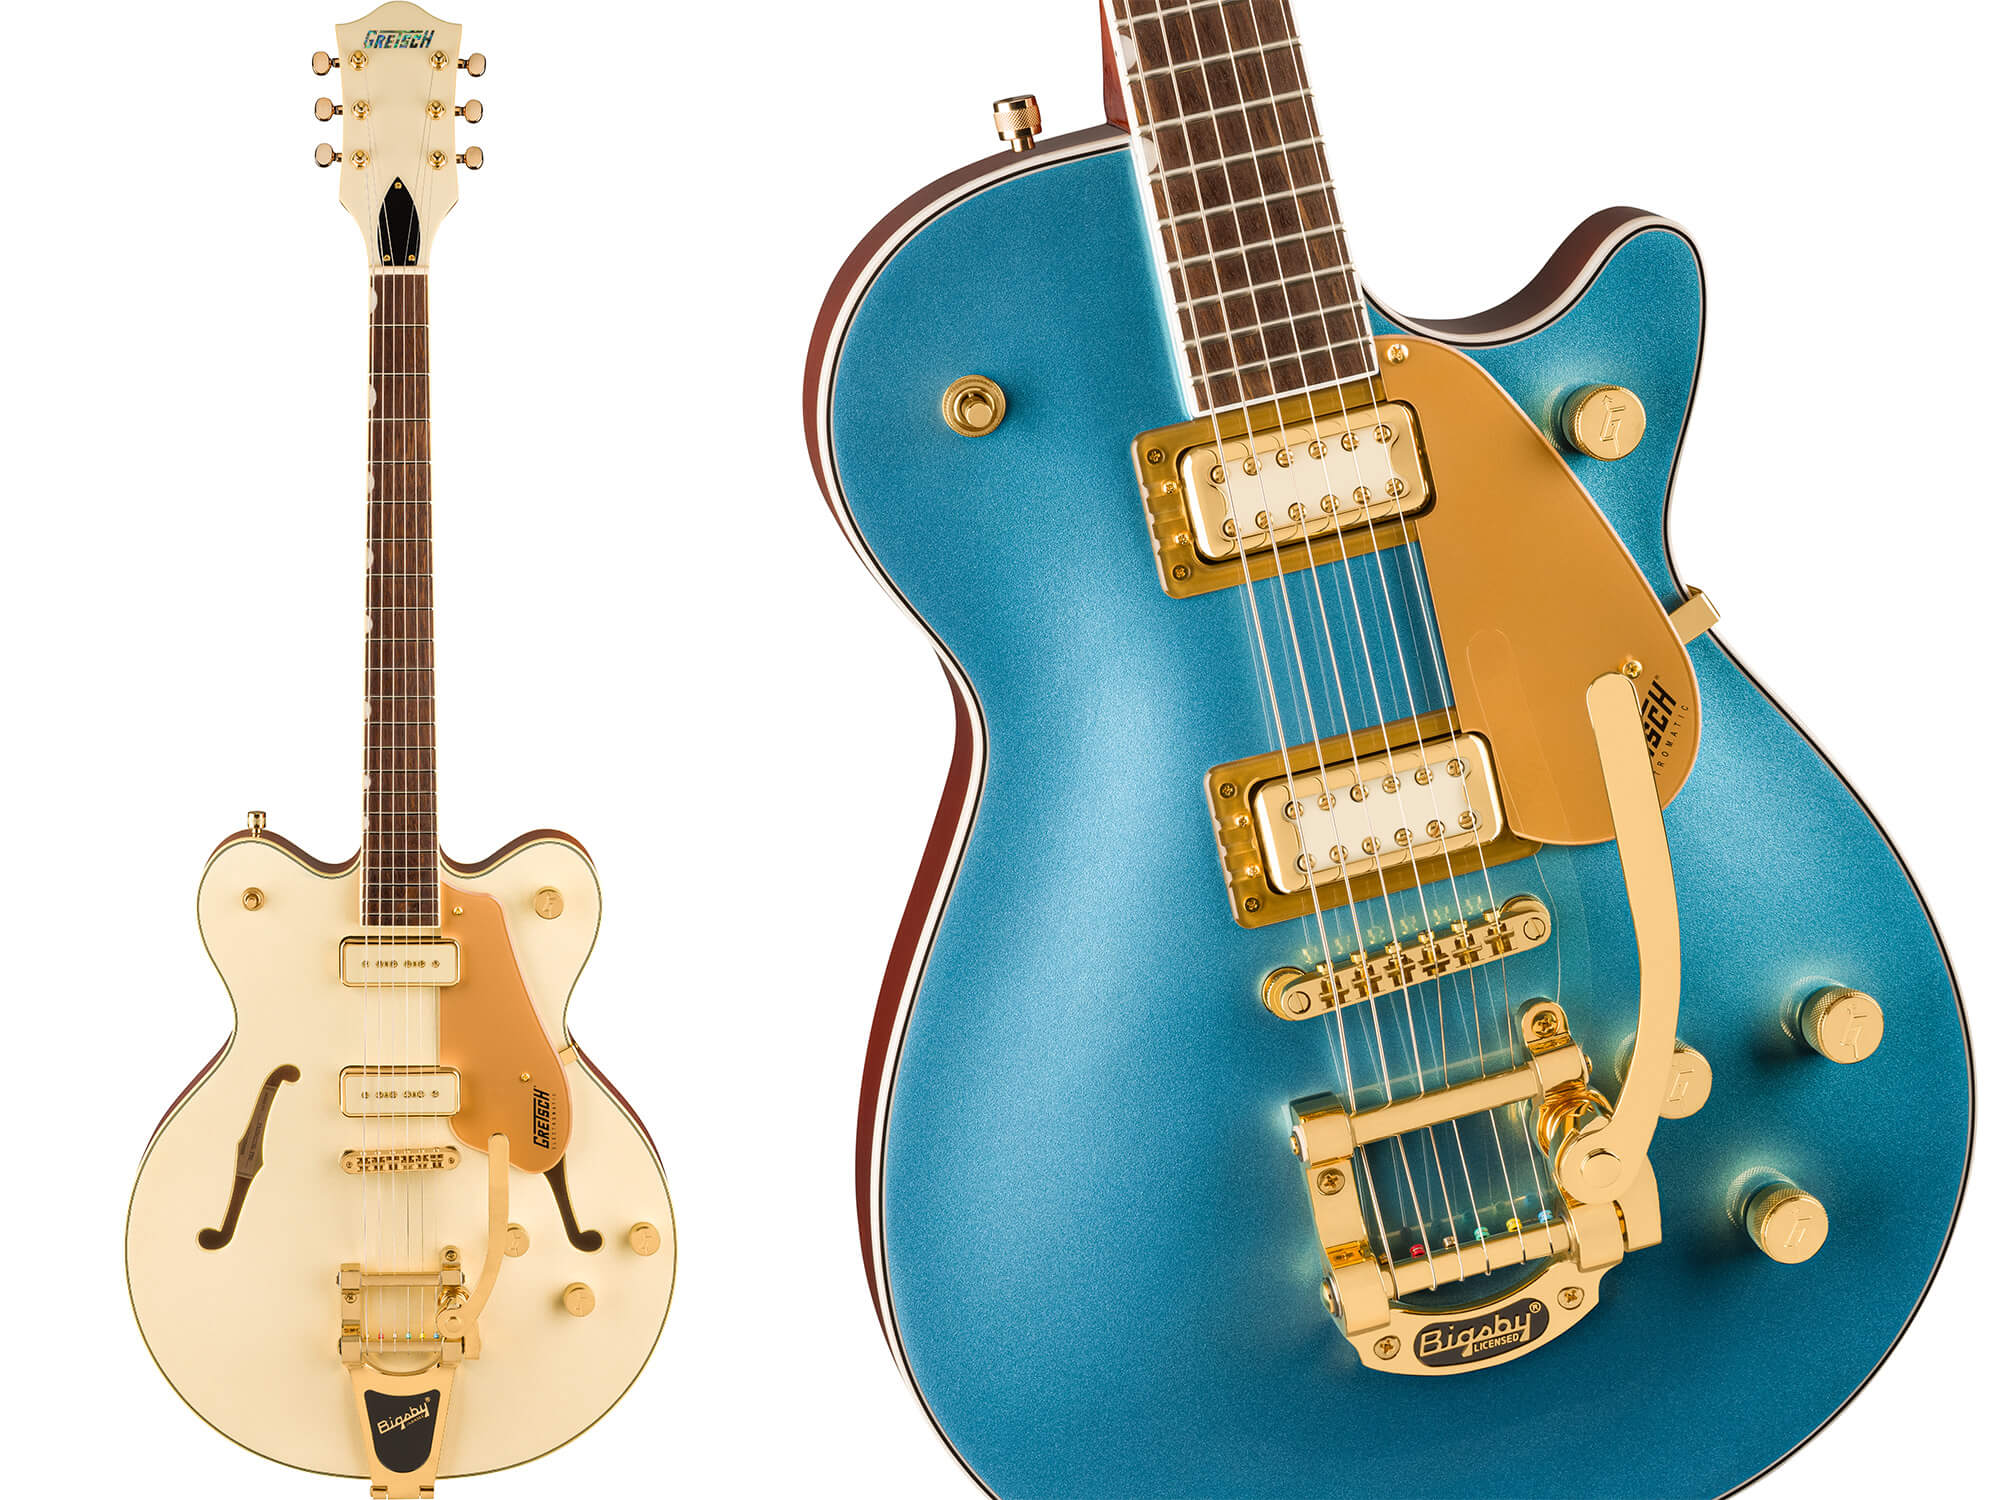 Gretsch Electromatic pristine models. The double-cut White Gold edition (left) and a close up of the Mako single-cut Jet (right).